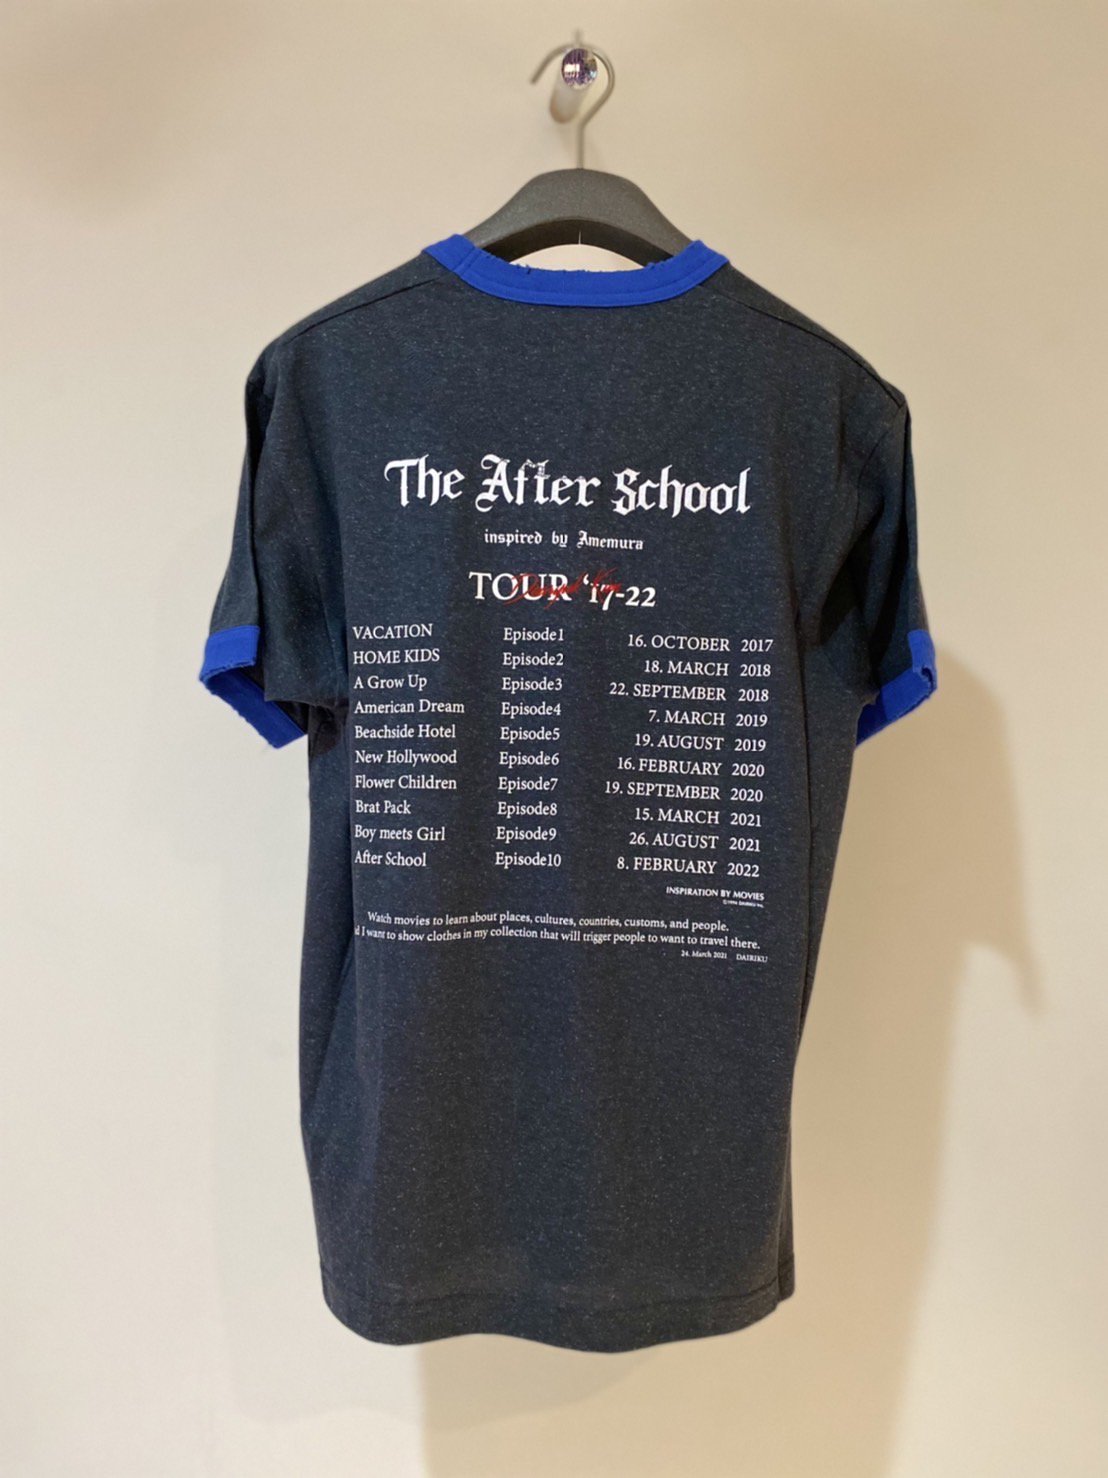 DAIRIKU<br />The After School Tour Trim Tee / Black&Blue<img class='new_mark_img2' src='https://img.shop-pro.jp/img/new/icons14.gif' style='border:none;display:inline;margin:0px;padding:0px;width:auto;' />